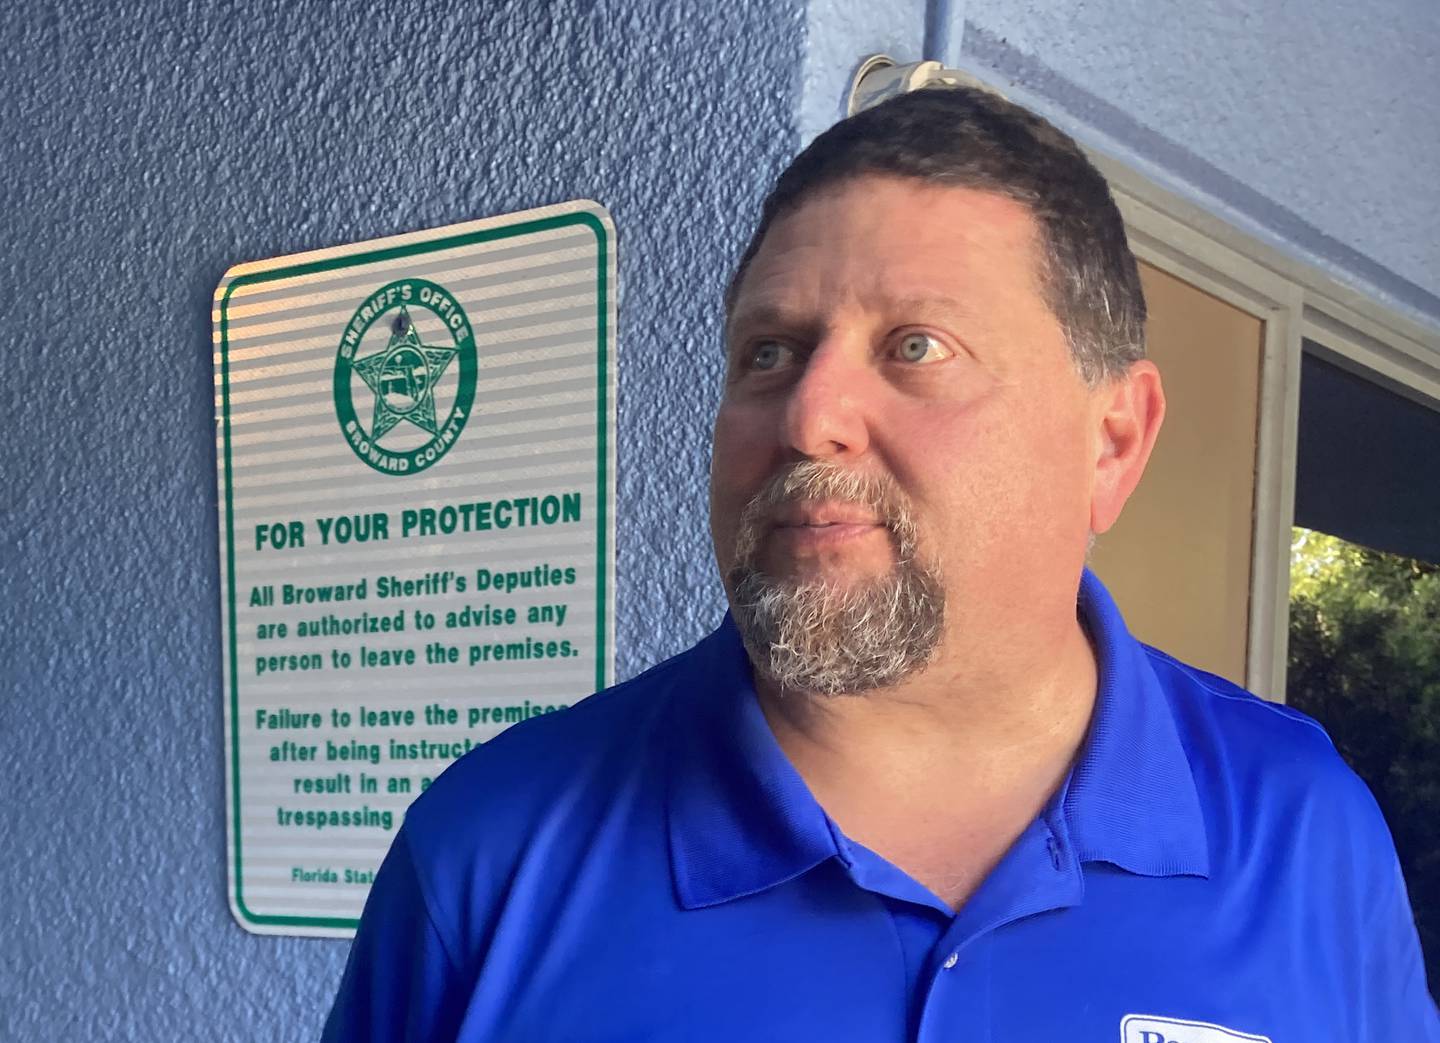 Izzy Fintz, manager of the Quality Inn & Suites of Hollywood, said he takes human trafficking seriously but can't control what guests do in the privacy of their rooms. 